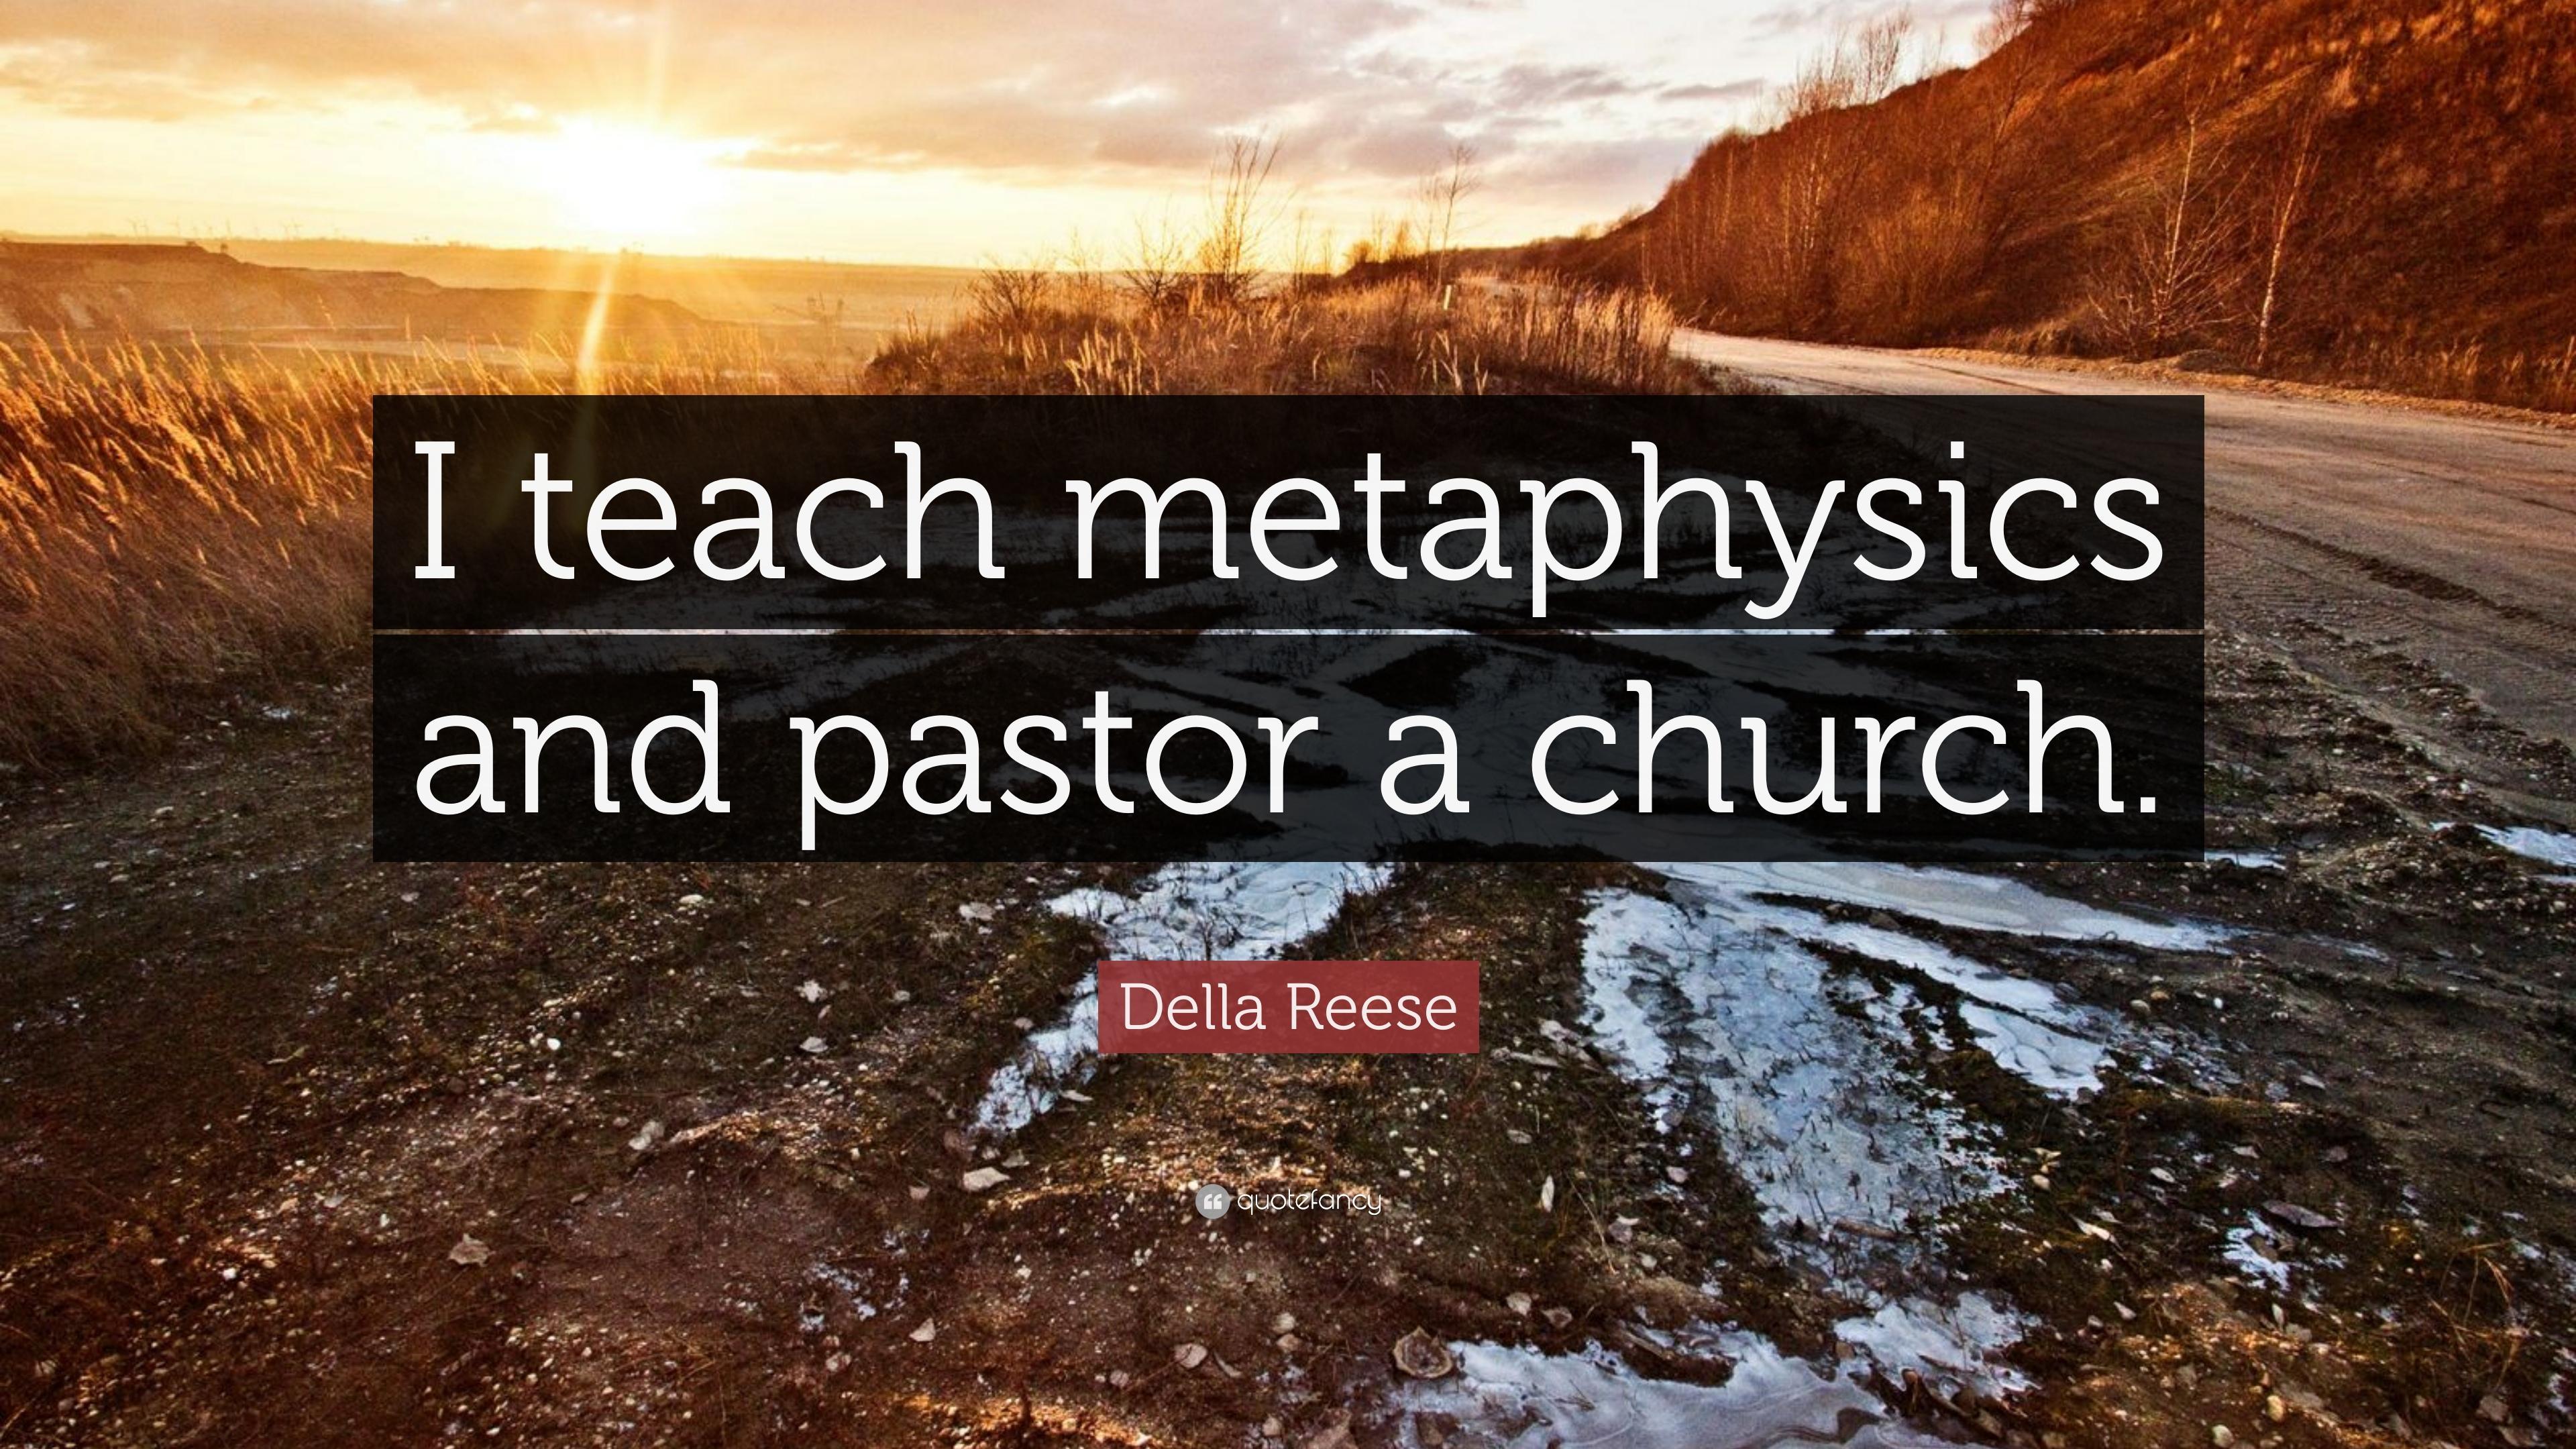 Della Reese Quote: “I teach metaphysics and pastor a church.” 7